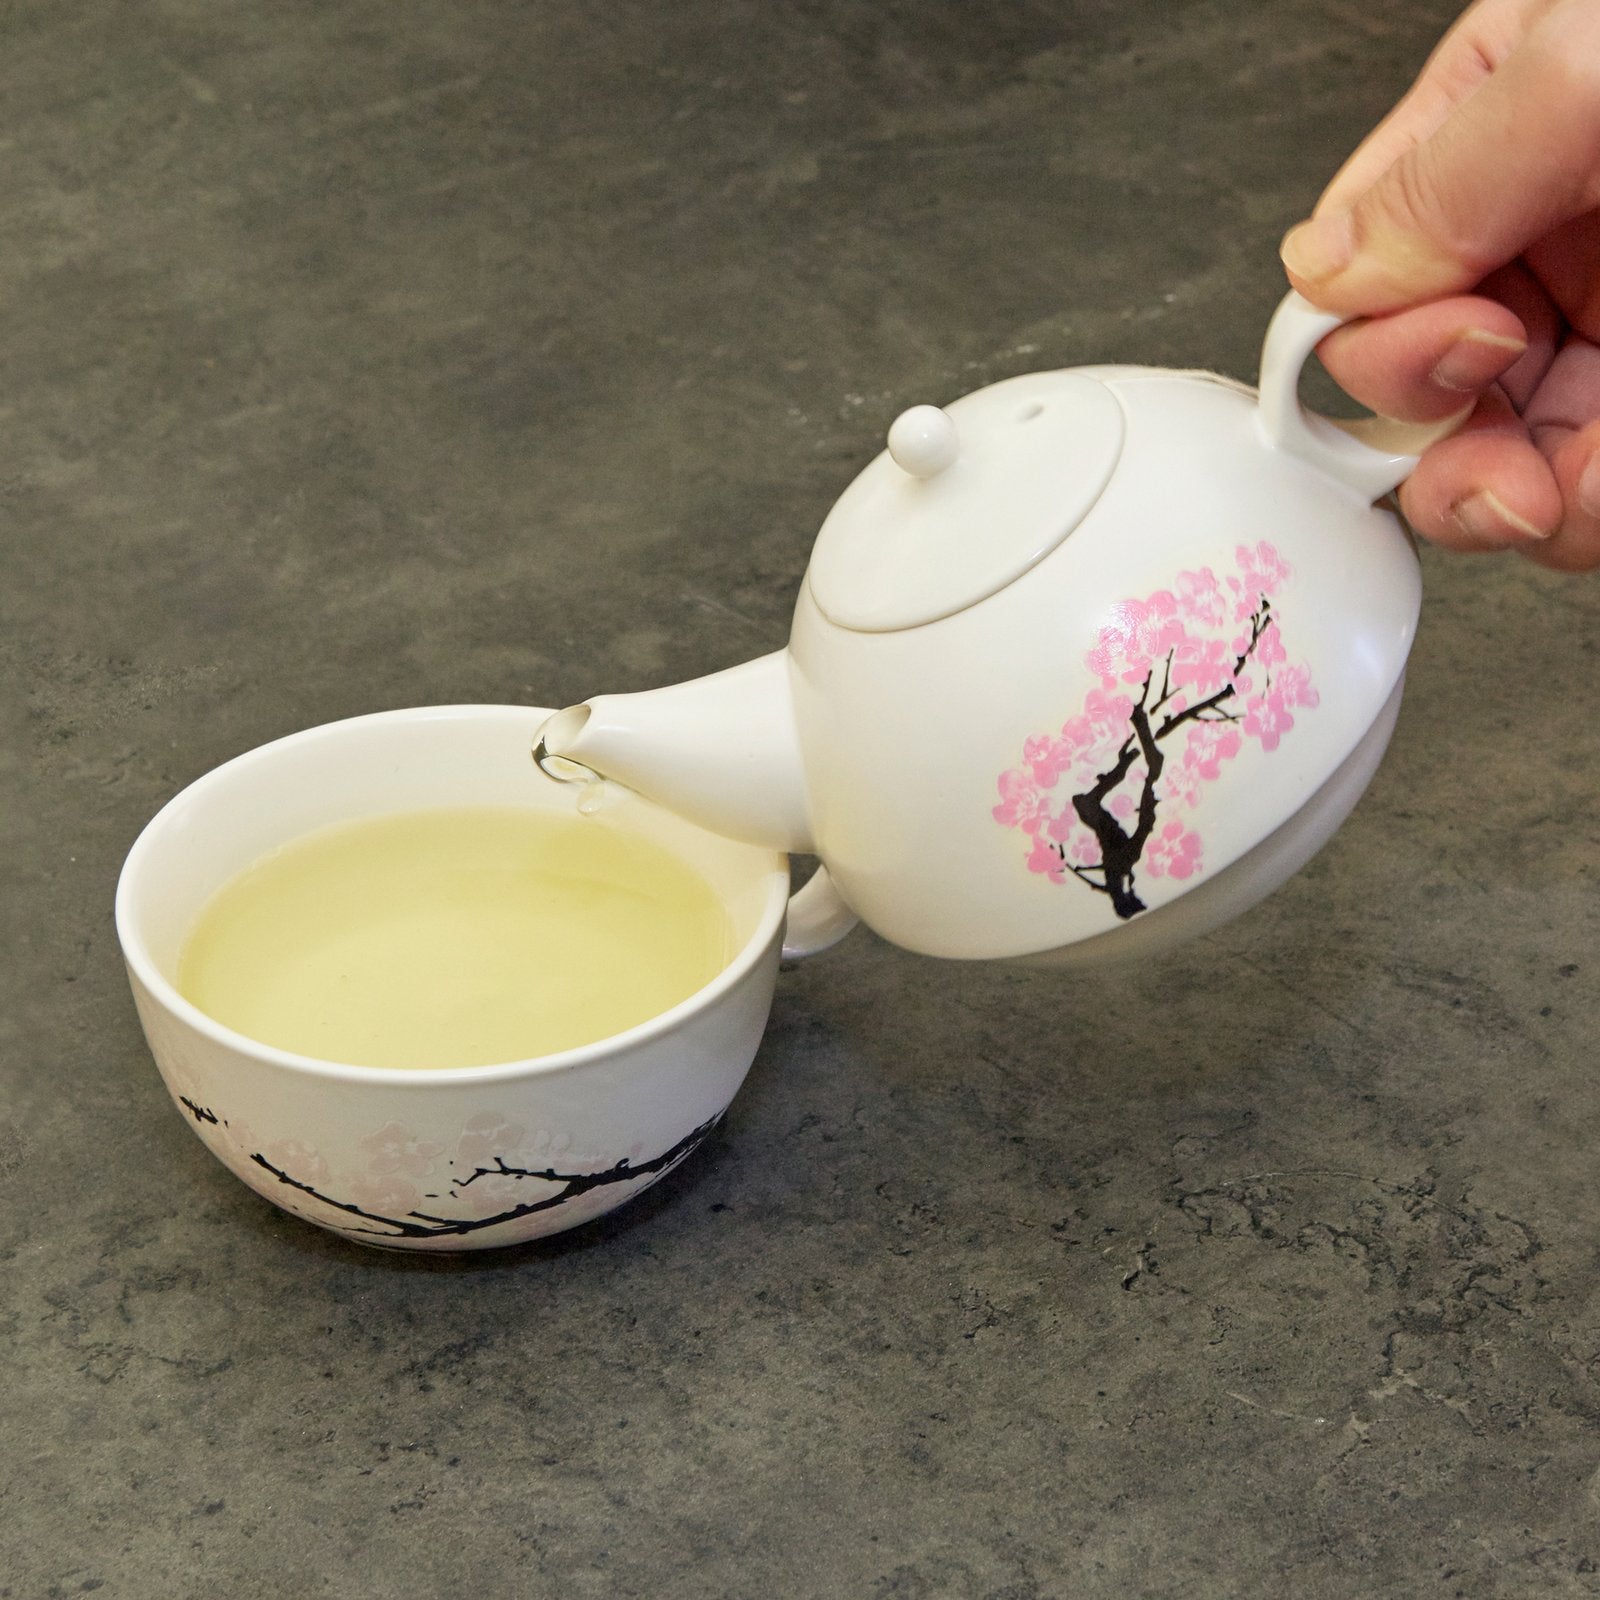 Blossom Morph Heat-Changing Tea Set for One